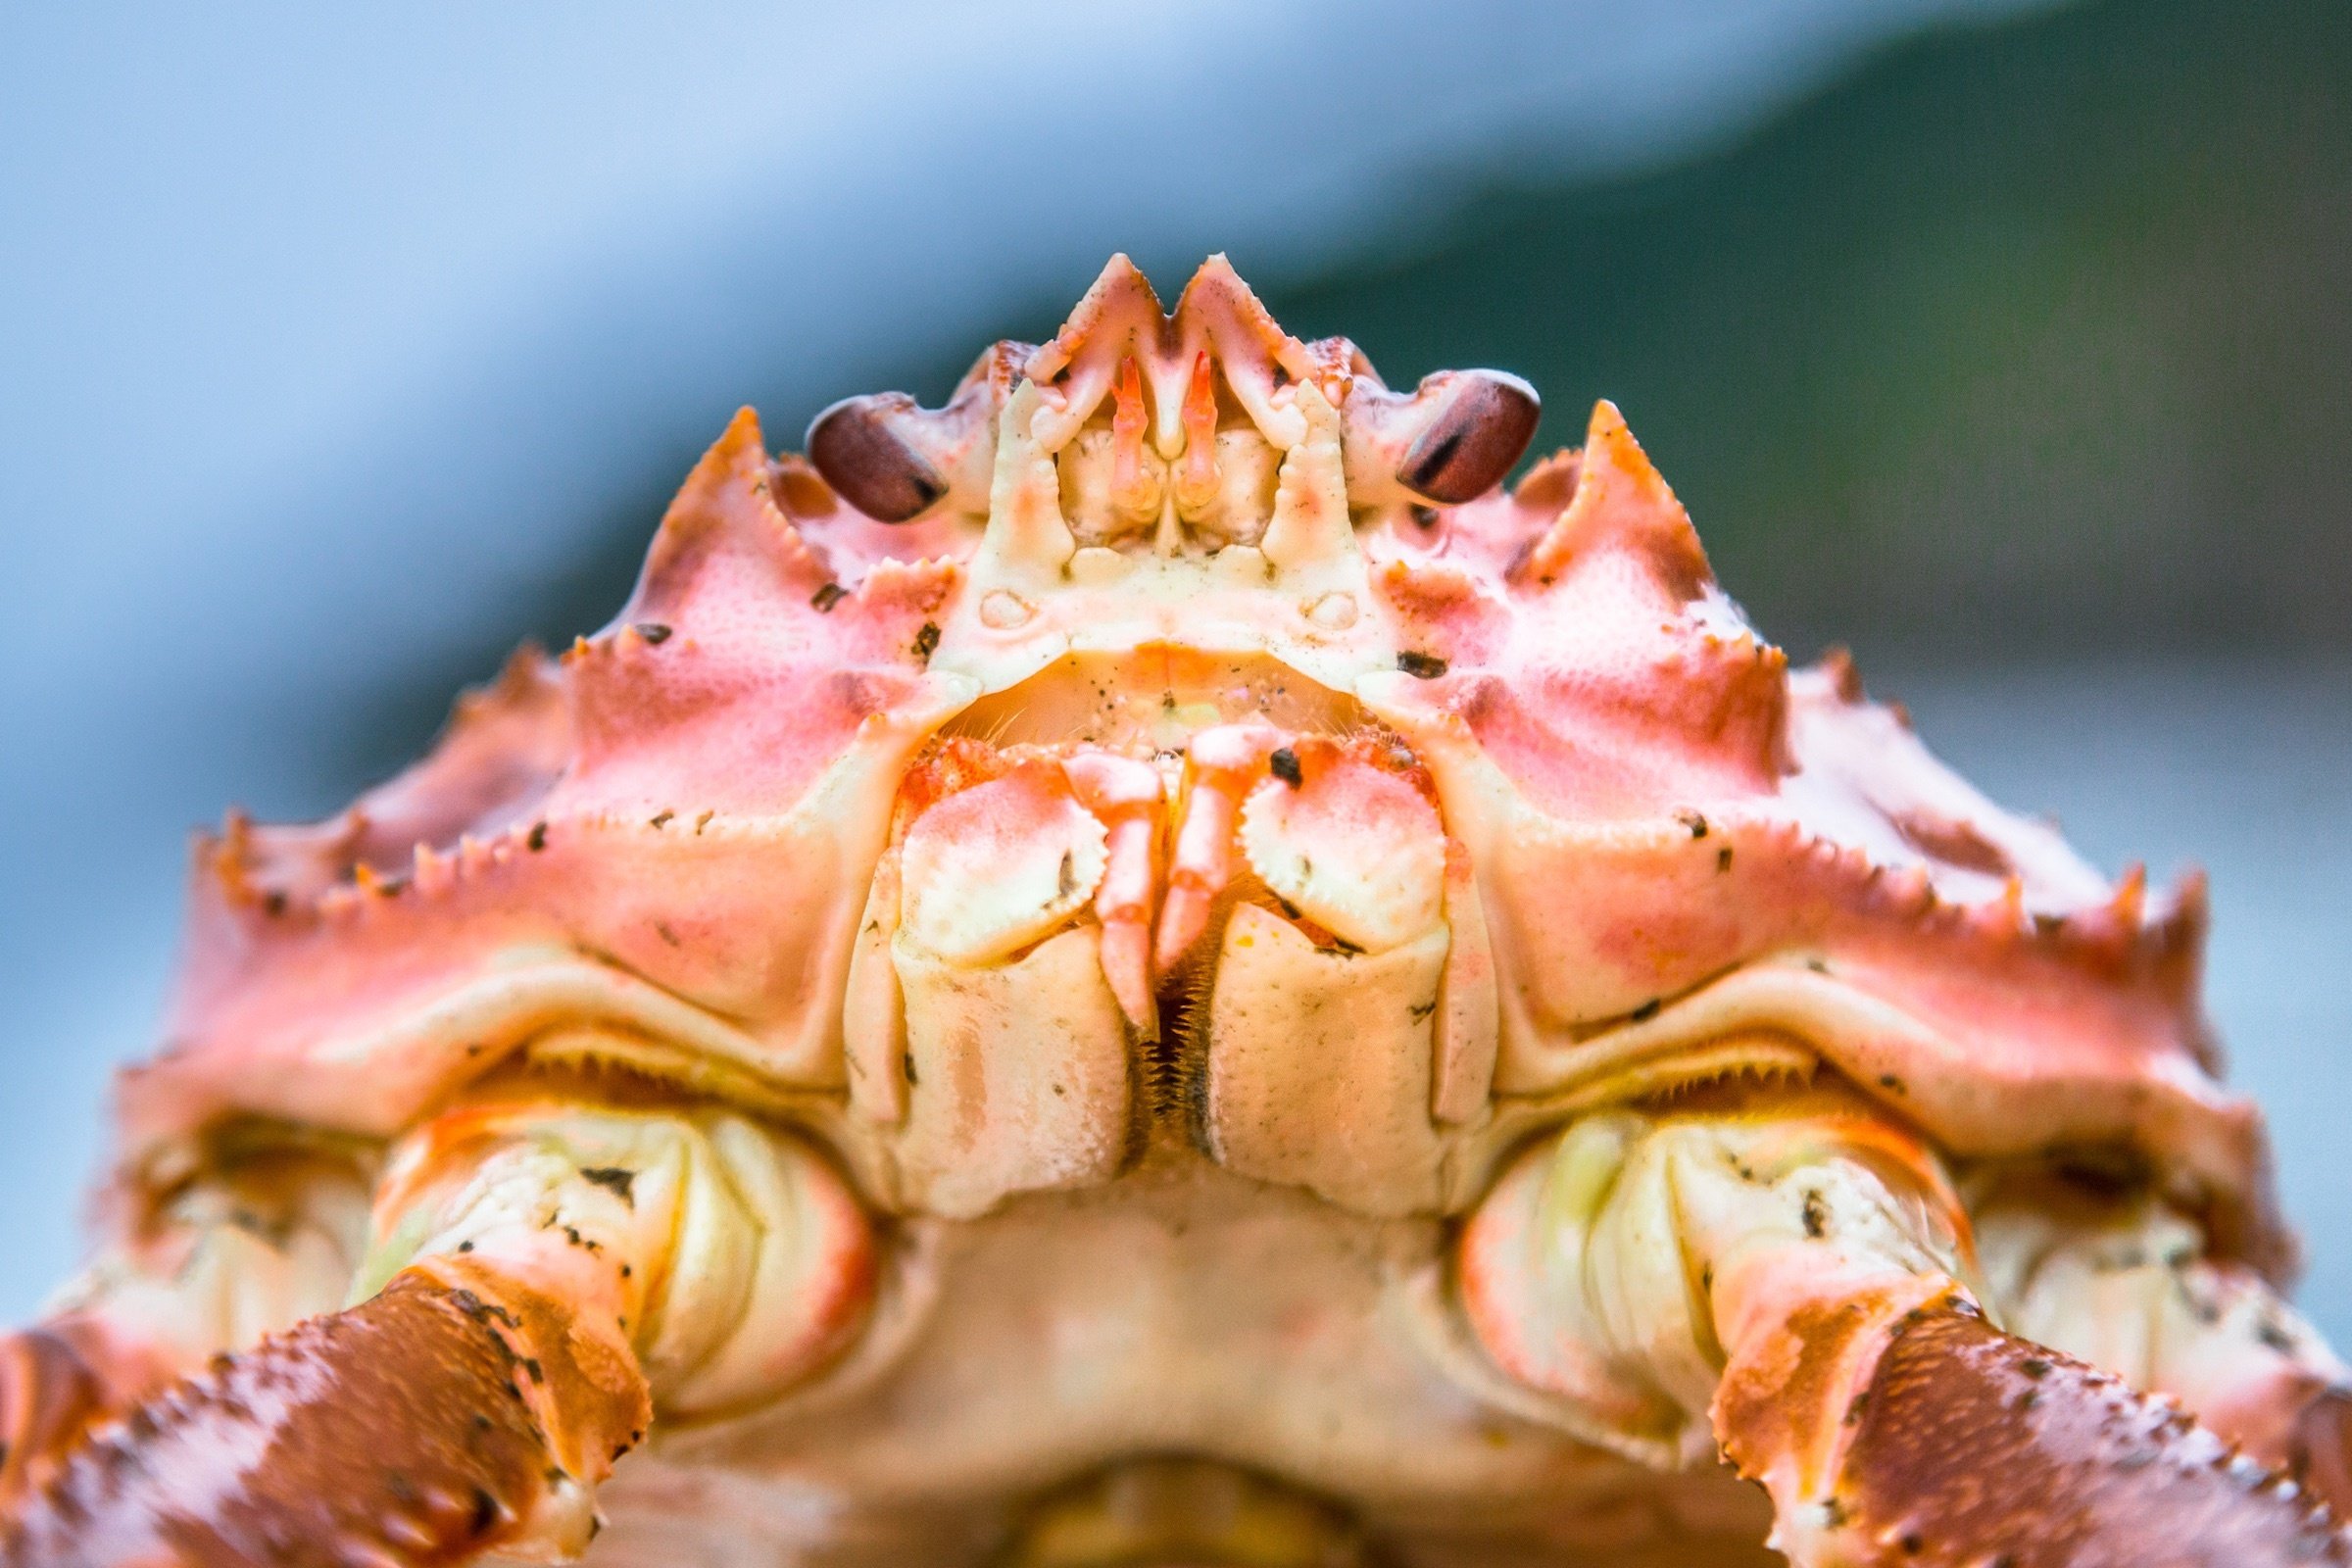 the head of a snow crab